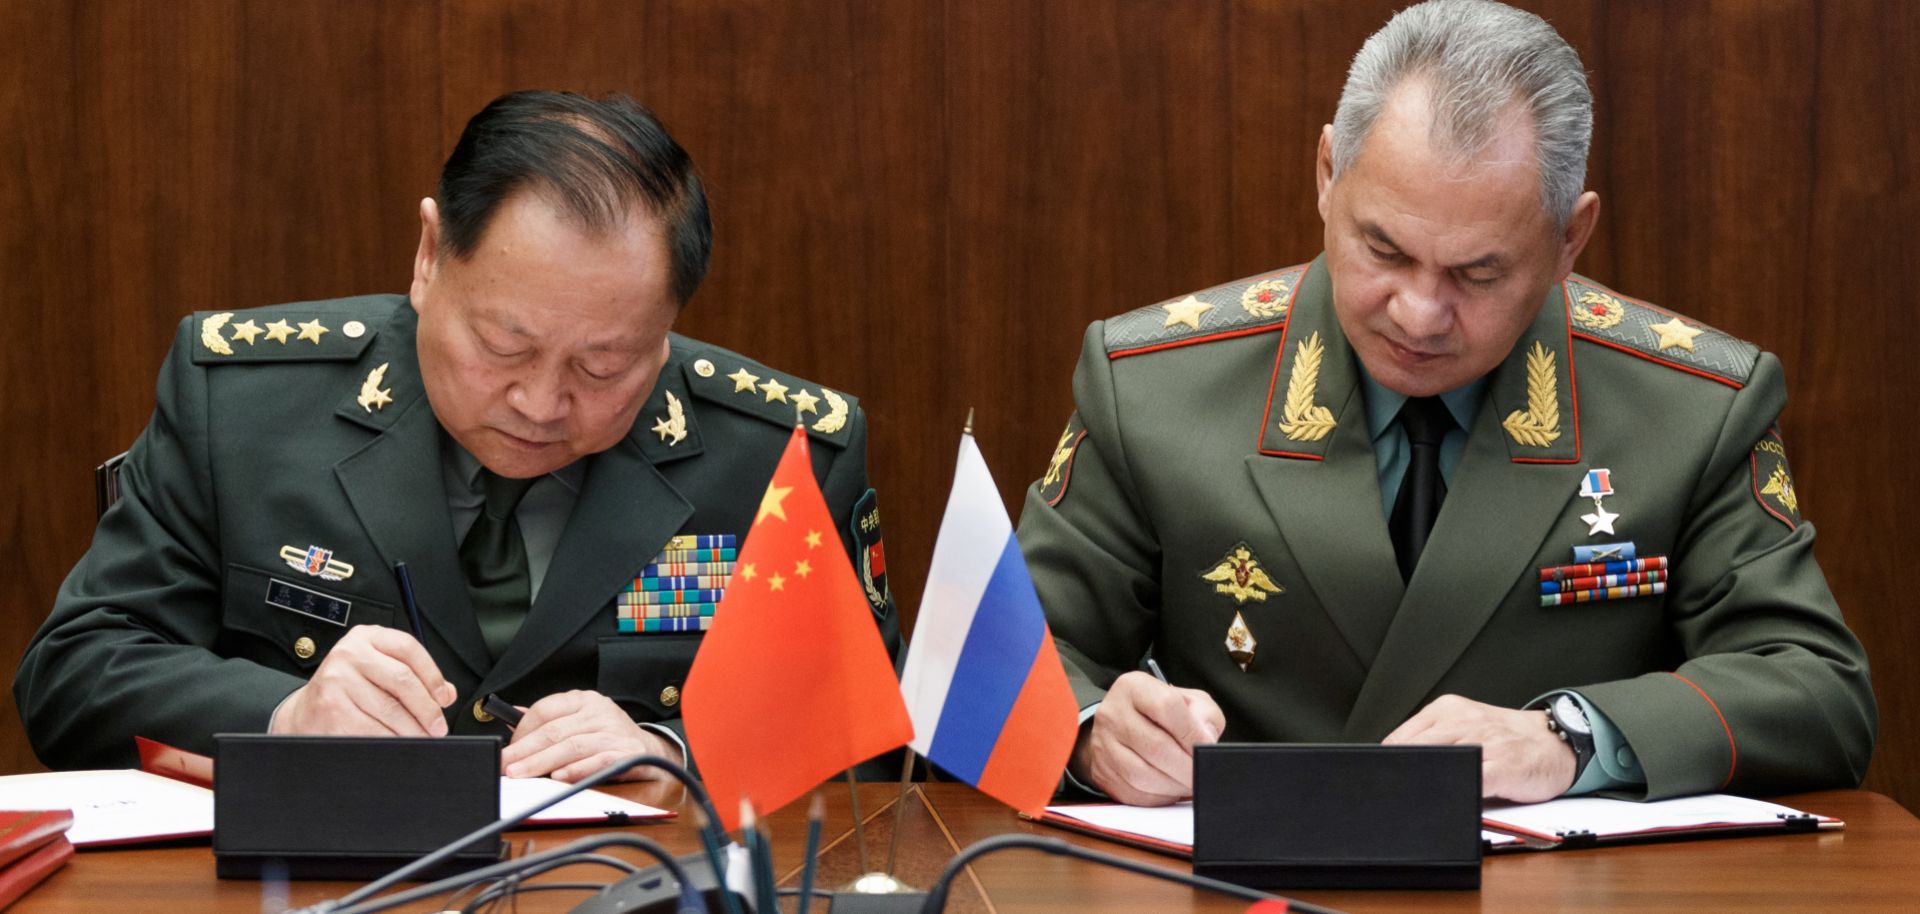 Russian Defense Minister Sergei Shoigu, right, and Zhang Youxia, vice chairman of China's Central Military Commission, sign documents boosting military ties in Moscow on Sept. 4, 2019.